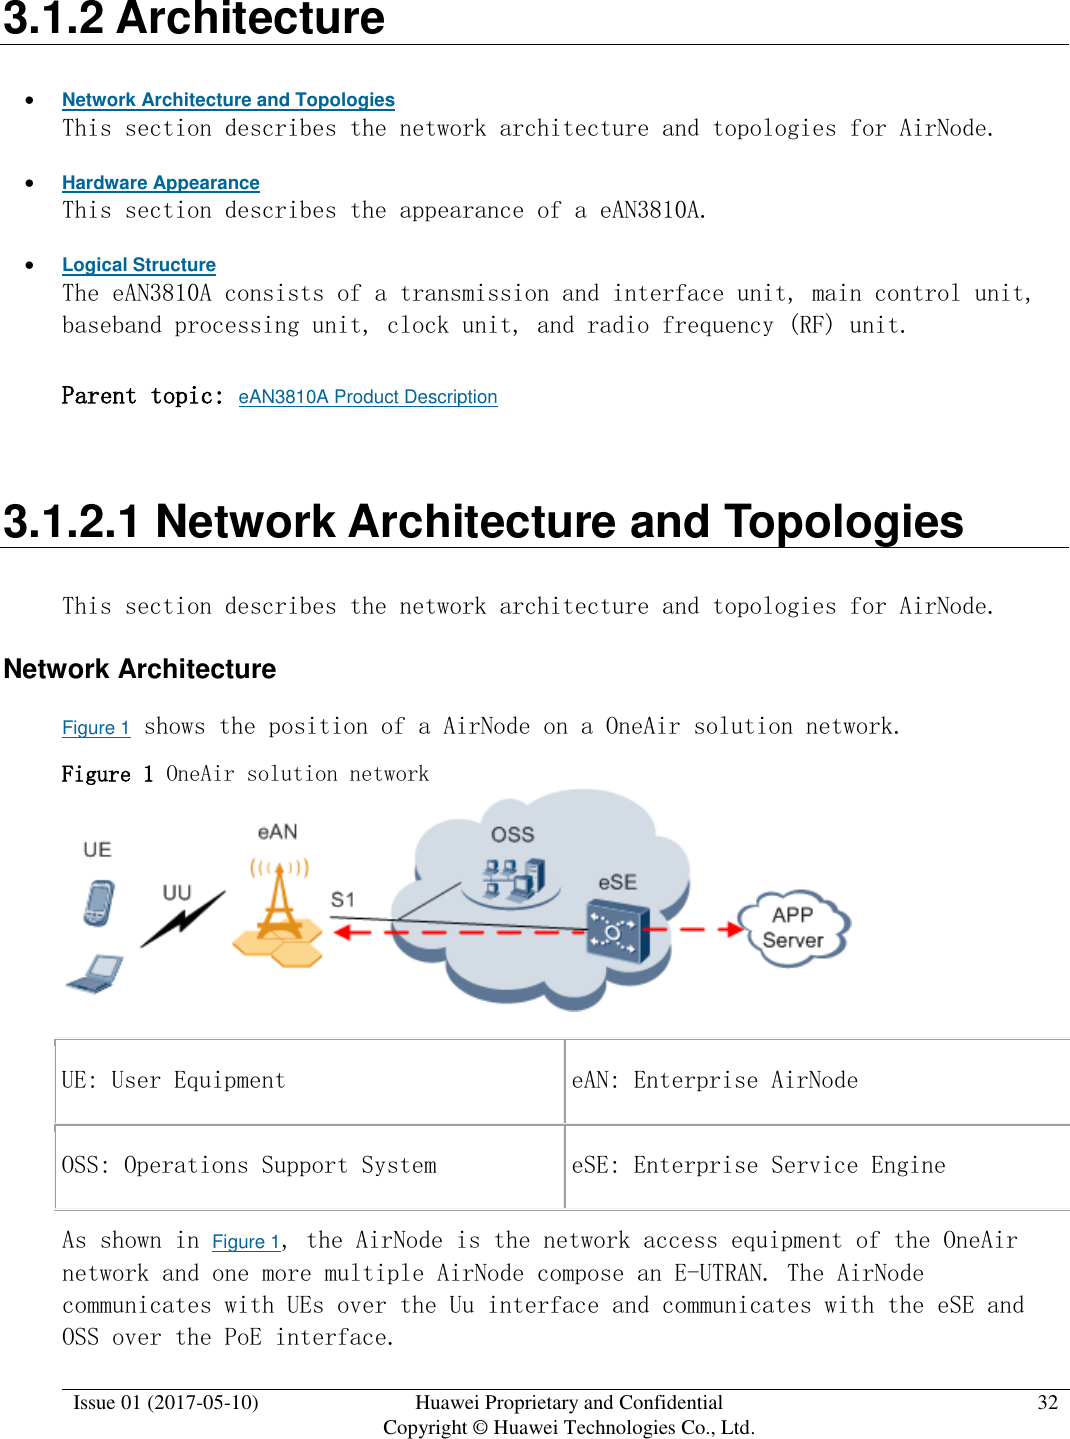  Issue 01 (2017-05-10) Huawei Proprietary and Confidential      Copyright © Huawei Technologies Co., Ltd. 32  3.1.2 Architecture  Network Architecture and Topologies This section describes the network architecture and topologies for AirNode.   Hardware Appearance This section describes the appearance of a eAN3810A.  Logical Structure The eAN3810A consists of a transmission and interface unit, main control unit, baseband processing unit, clock unit, and radio frequency (RF) unit. Parent topic: eAN3810A Product Description 3.1.2.1 Network Architecture and Topologies This section describes the network architecture and topologies for AirNode.  Network Architecture Figure 1 shows the position of a AirNode on a OneAir solution network. Figure 1 OneAir solution network   UE: User Equipment eAN: Enterprise AirNode OSS: Operations Support System eSE: Enterprise Service Engine As shown in Figure 1, the AirNode is the network access equipment of the OneAir network and one more multiple AirNode compose an E-UTRAN. The AirNode communicates with UEs over the Uu interface and communicates with the eSE and OSS over the PoE interface. 